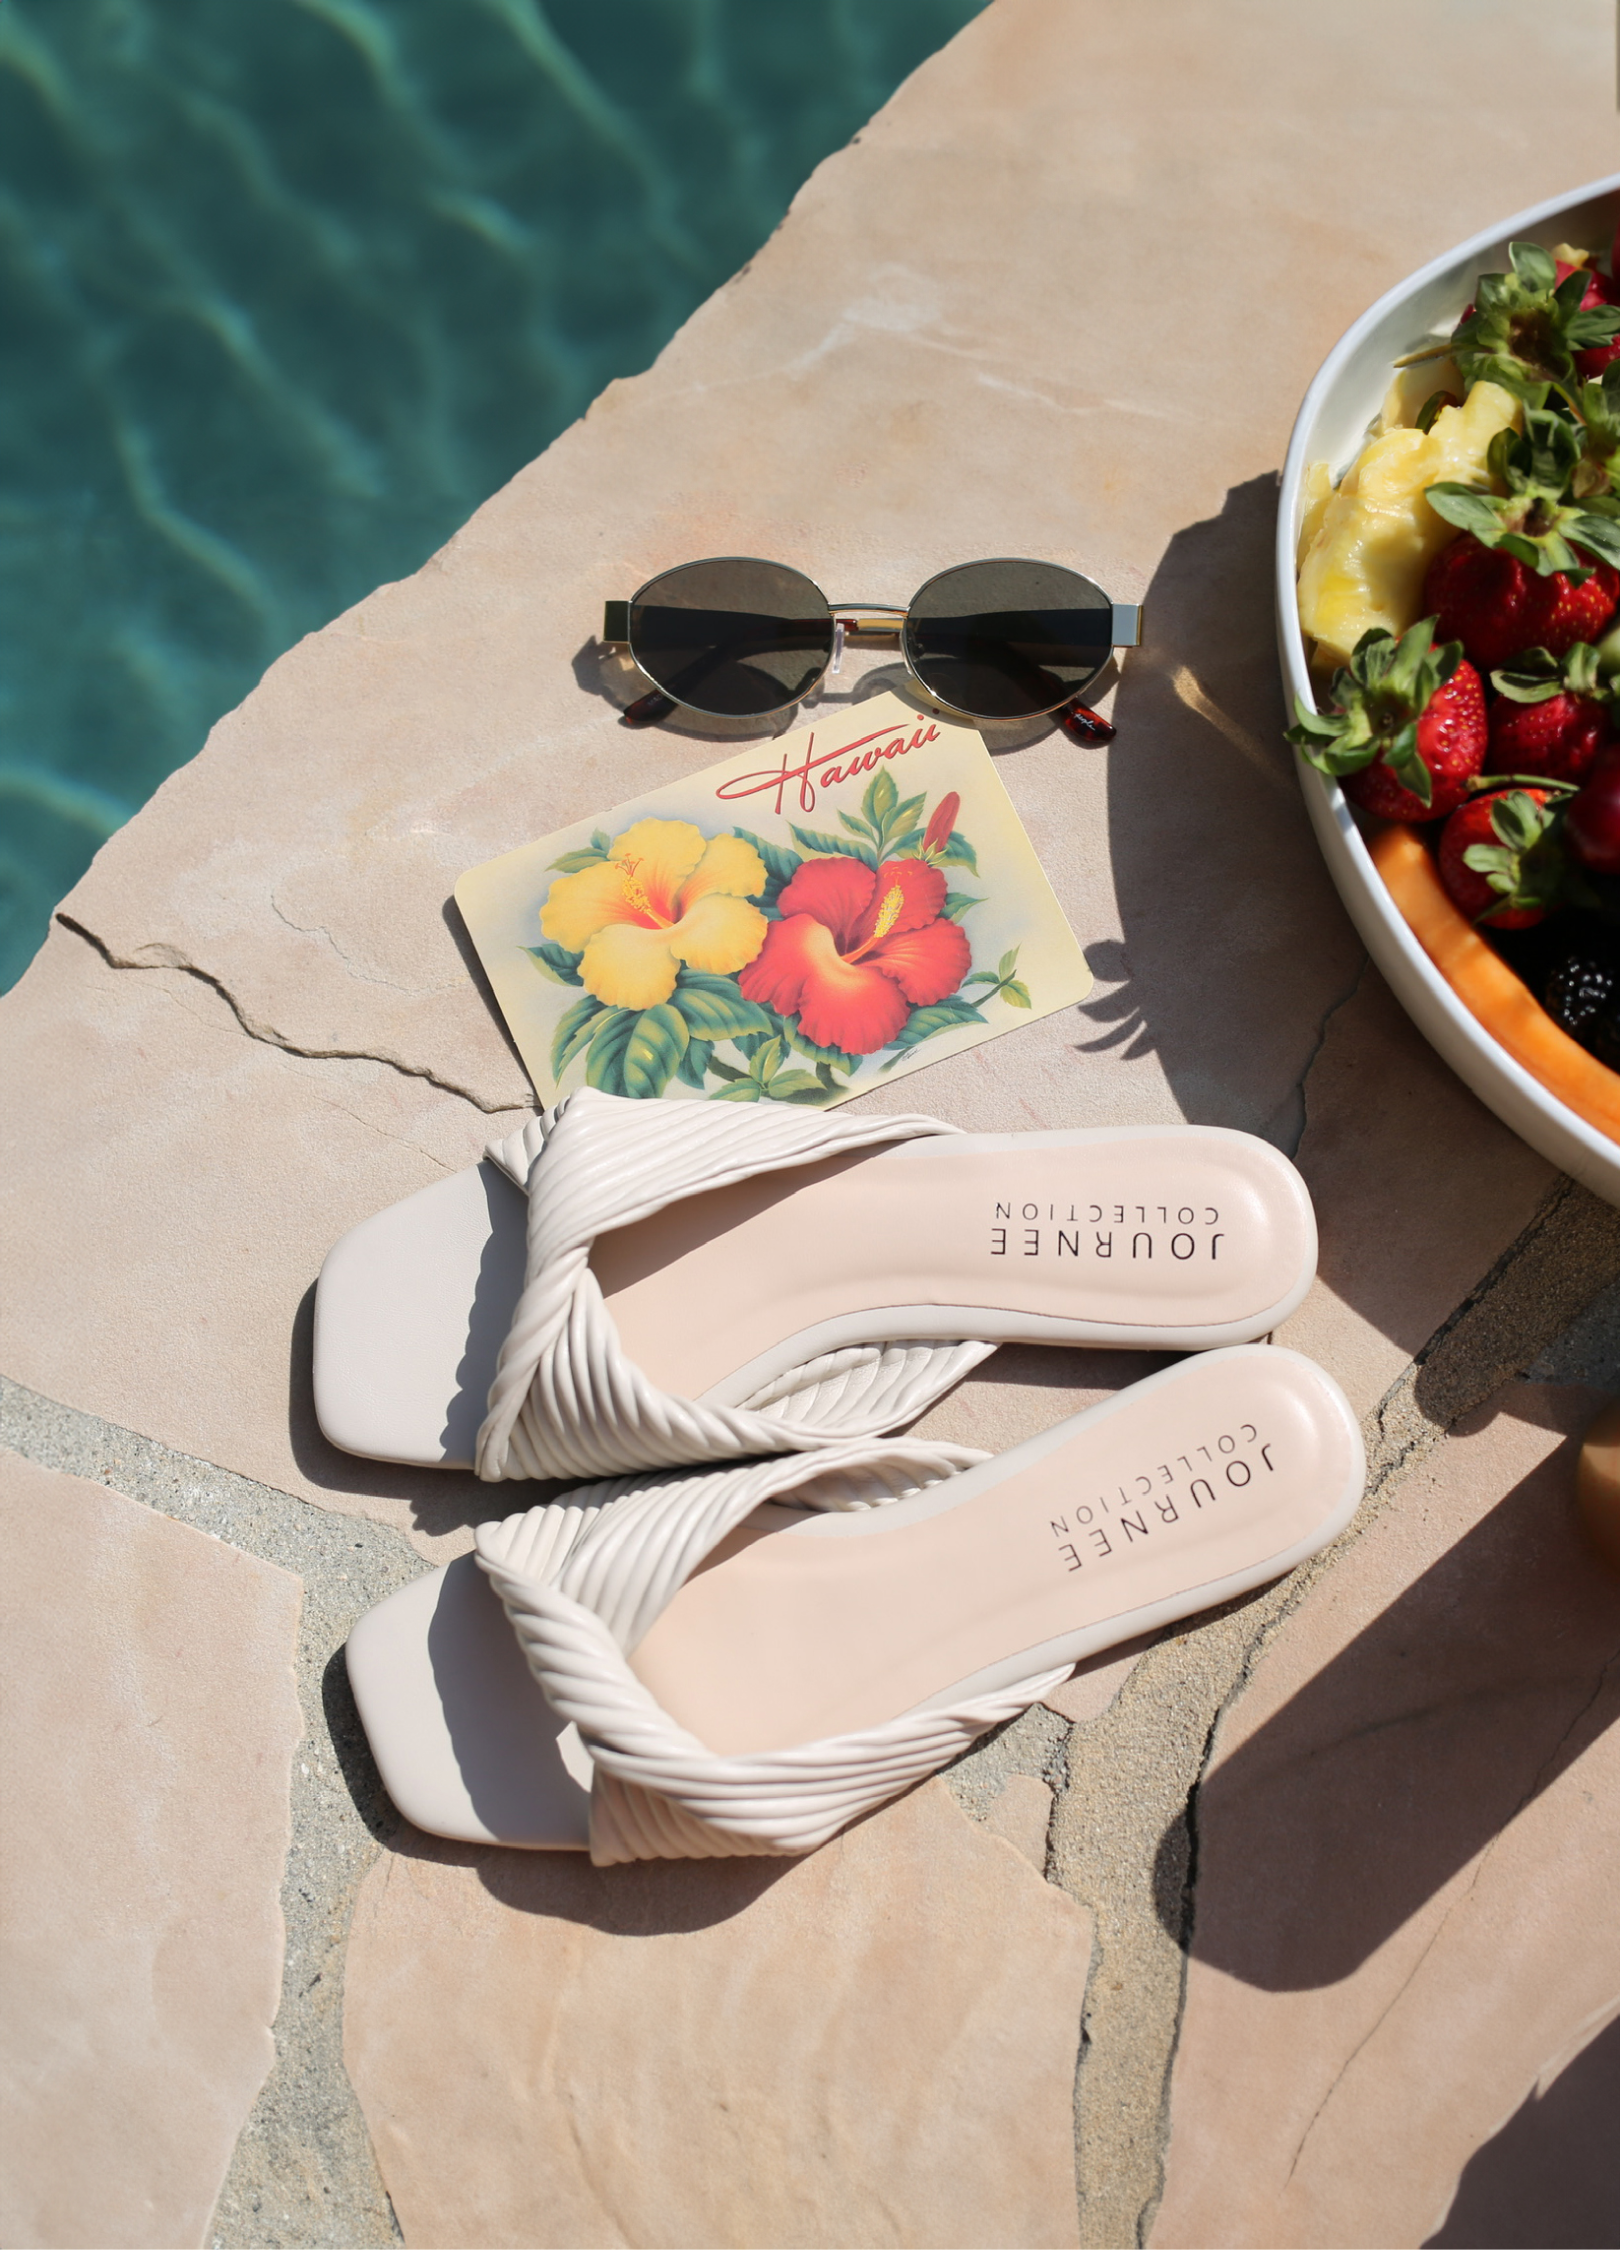 "Postcards from Paradise" header text with "find you perfect pair" subtext. Journee collection slide sandals in cream sit by a pool side next to a bowl of fruit, sunglasses, and post card. "Shop Now" CTA and button